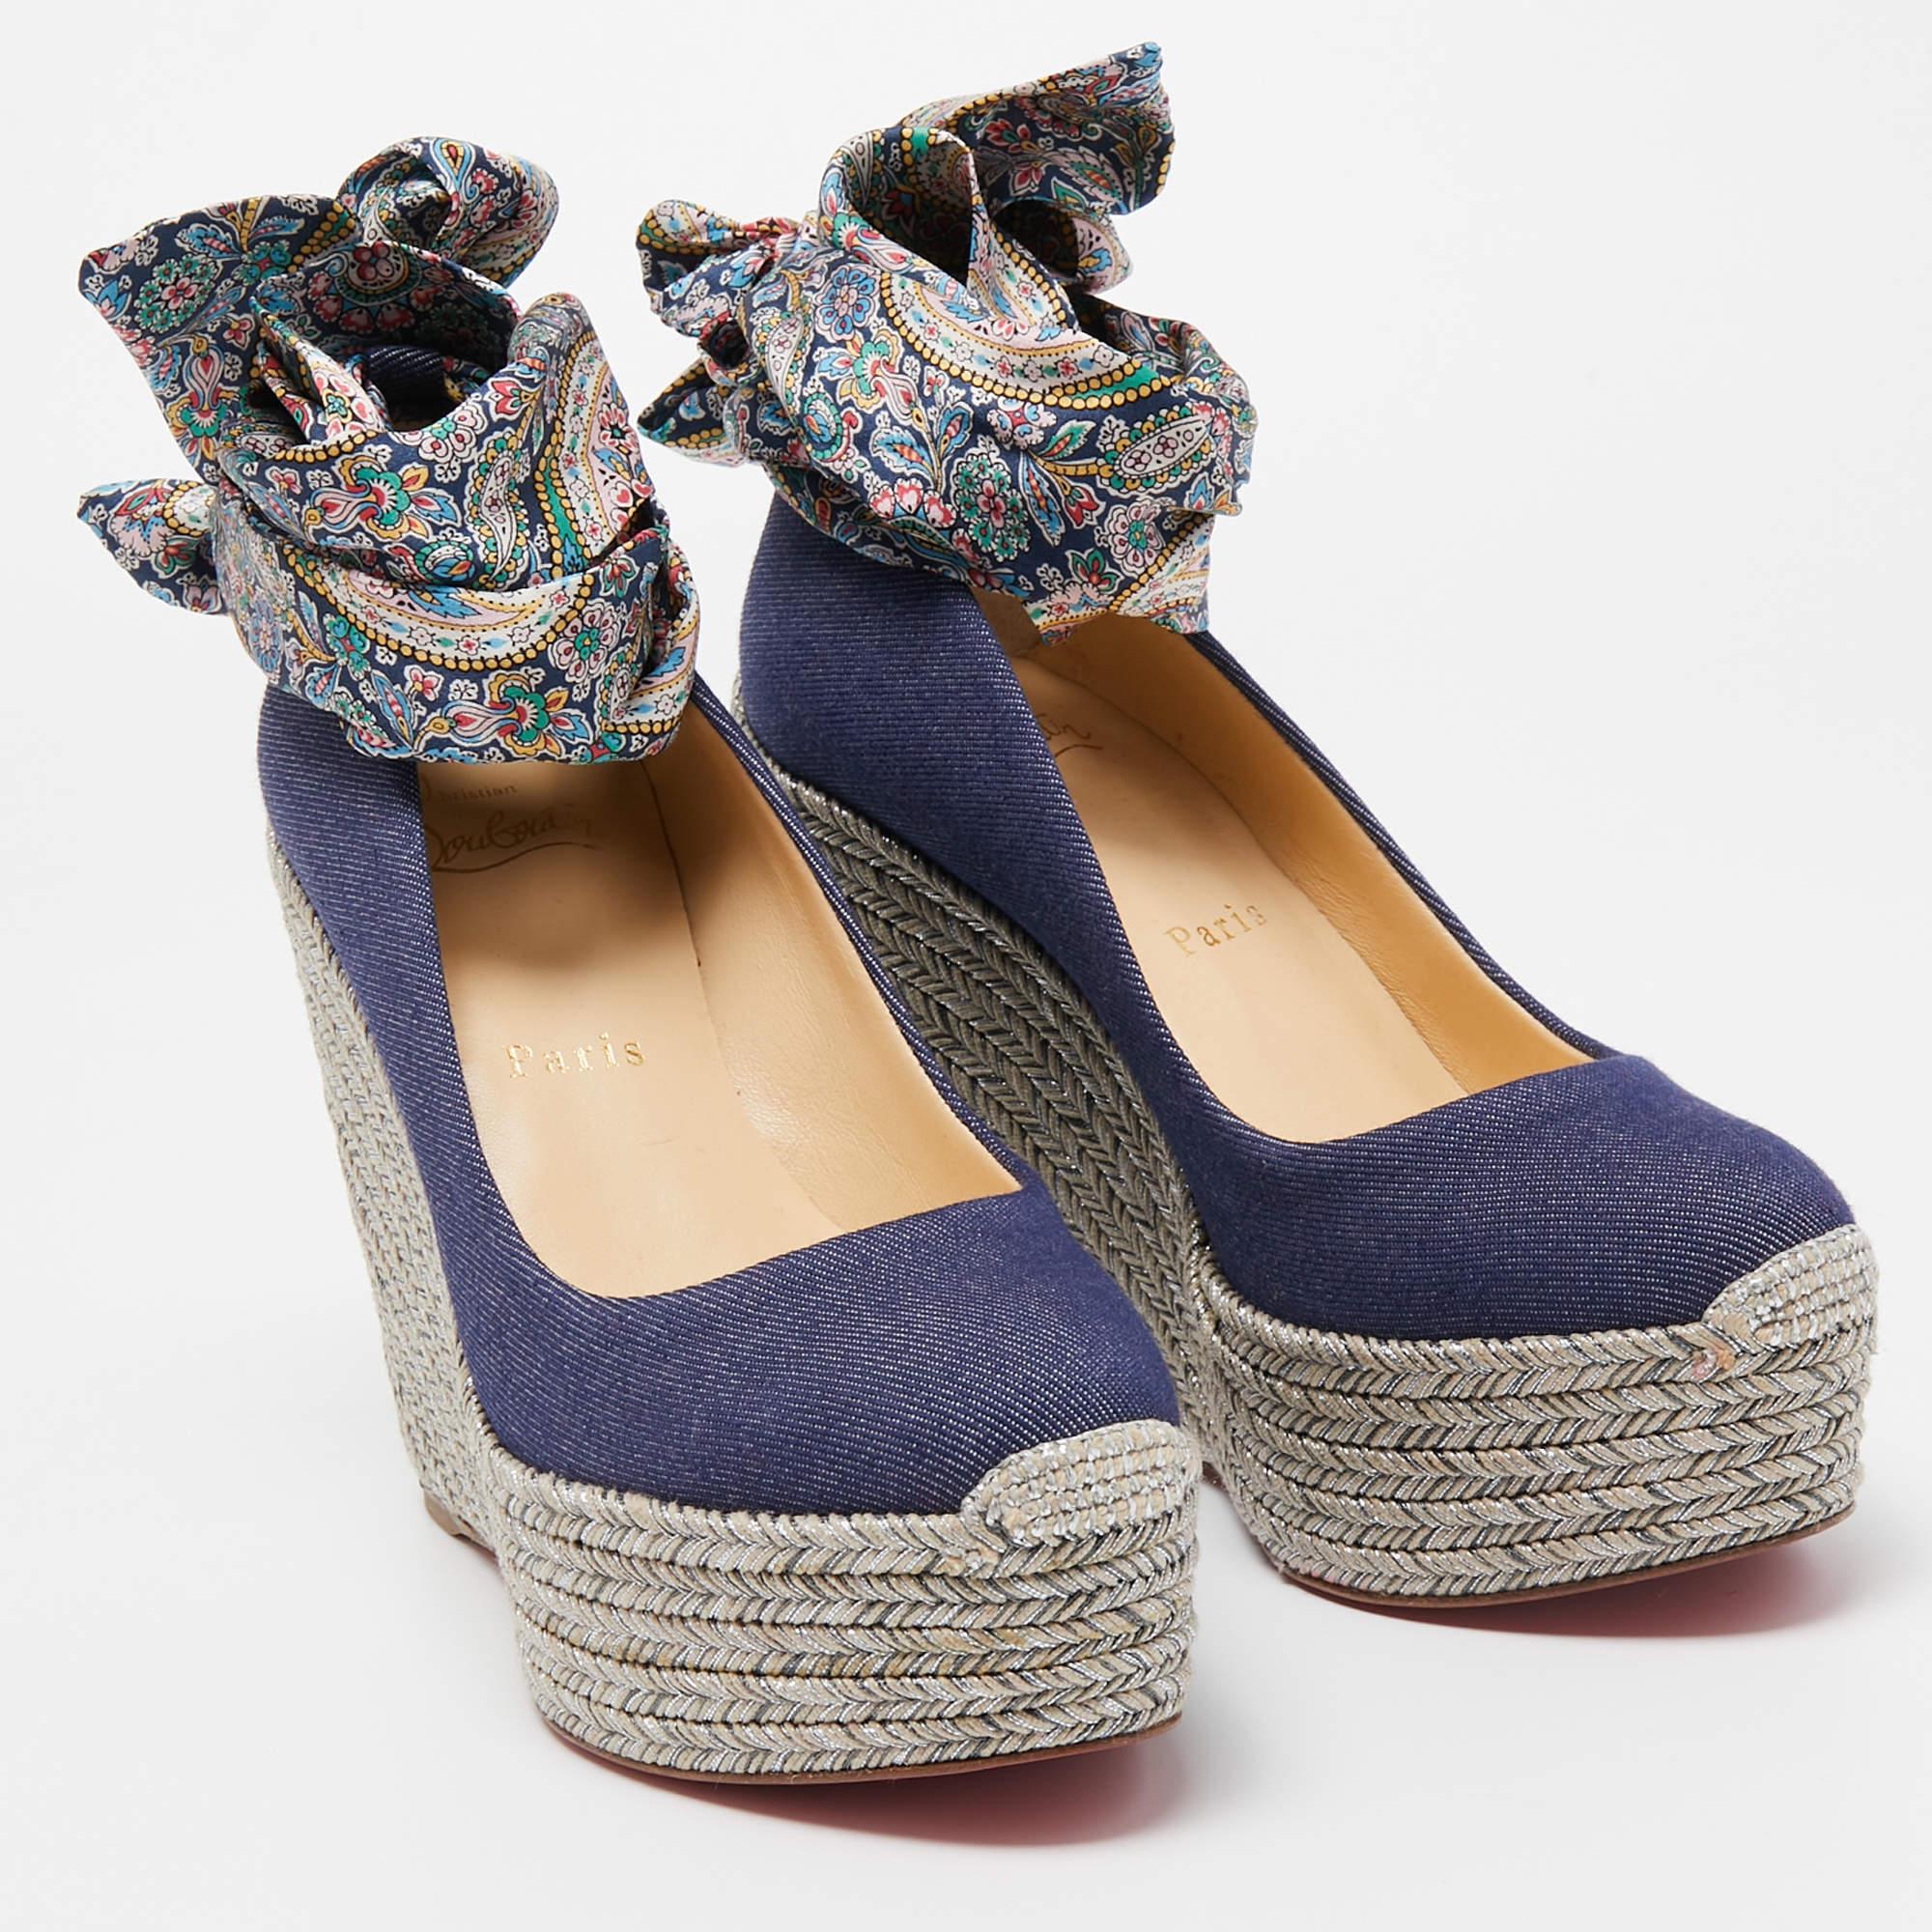 Women's Christian Louboutin Blue Denim and Printed Fabric Barbaria Zeppa Ankle Tie Pumps For Sale